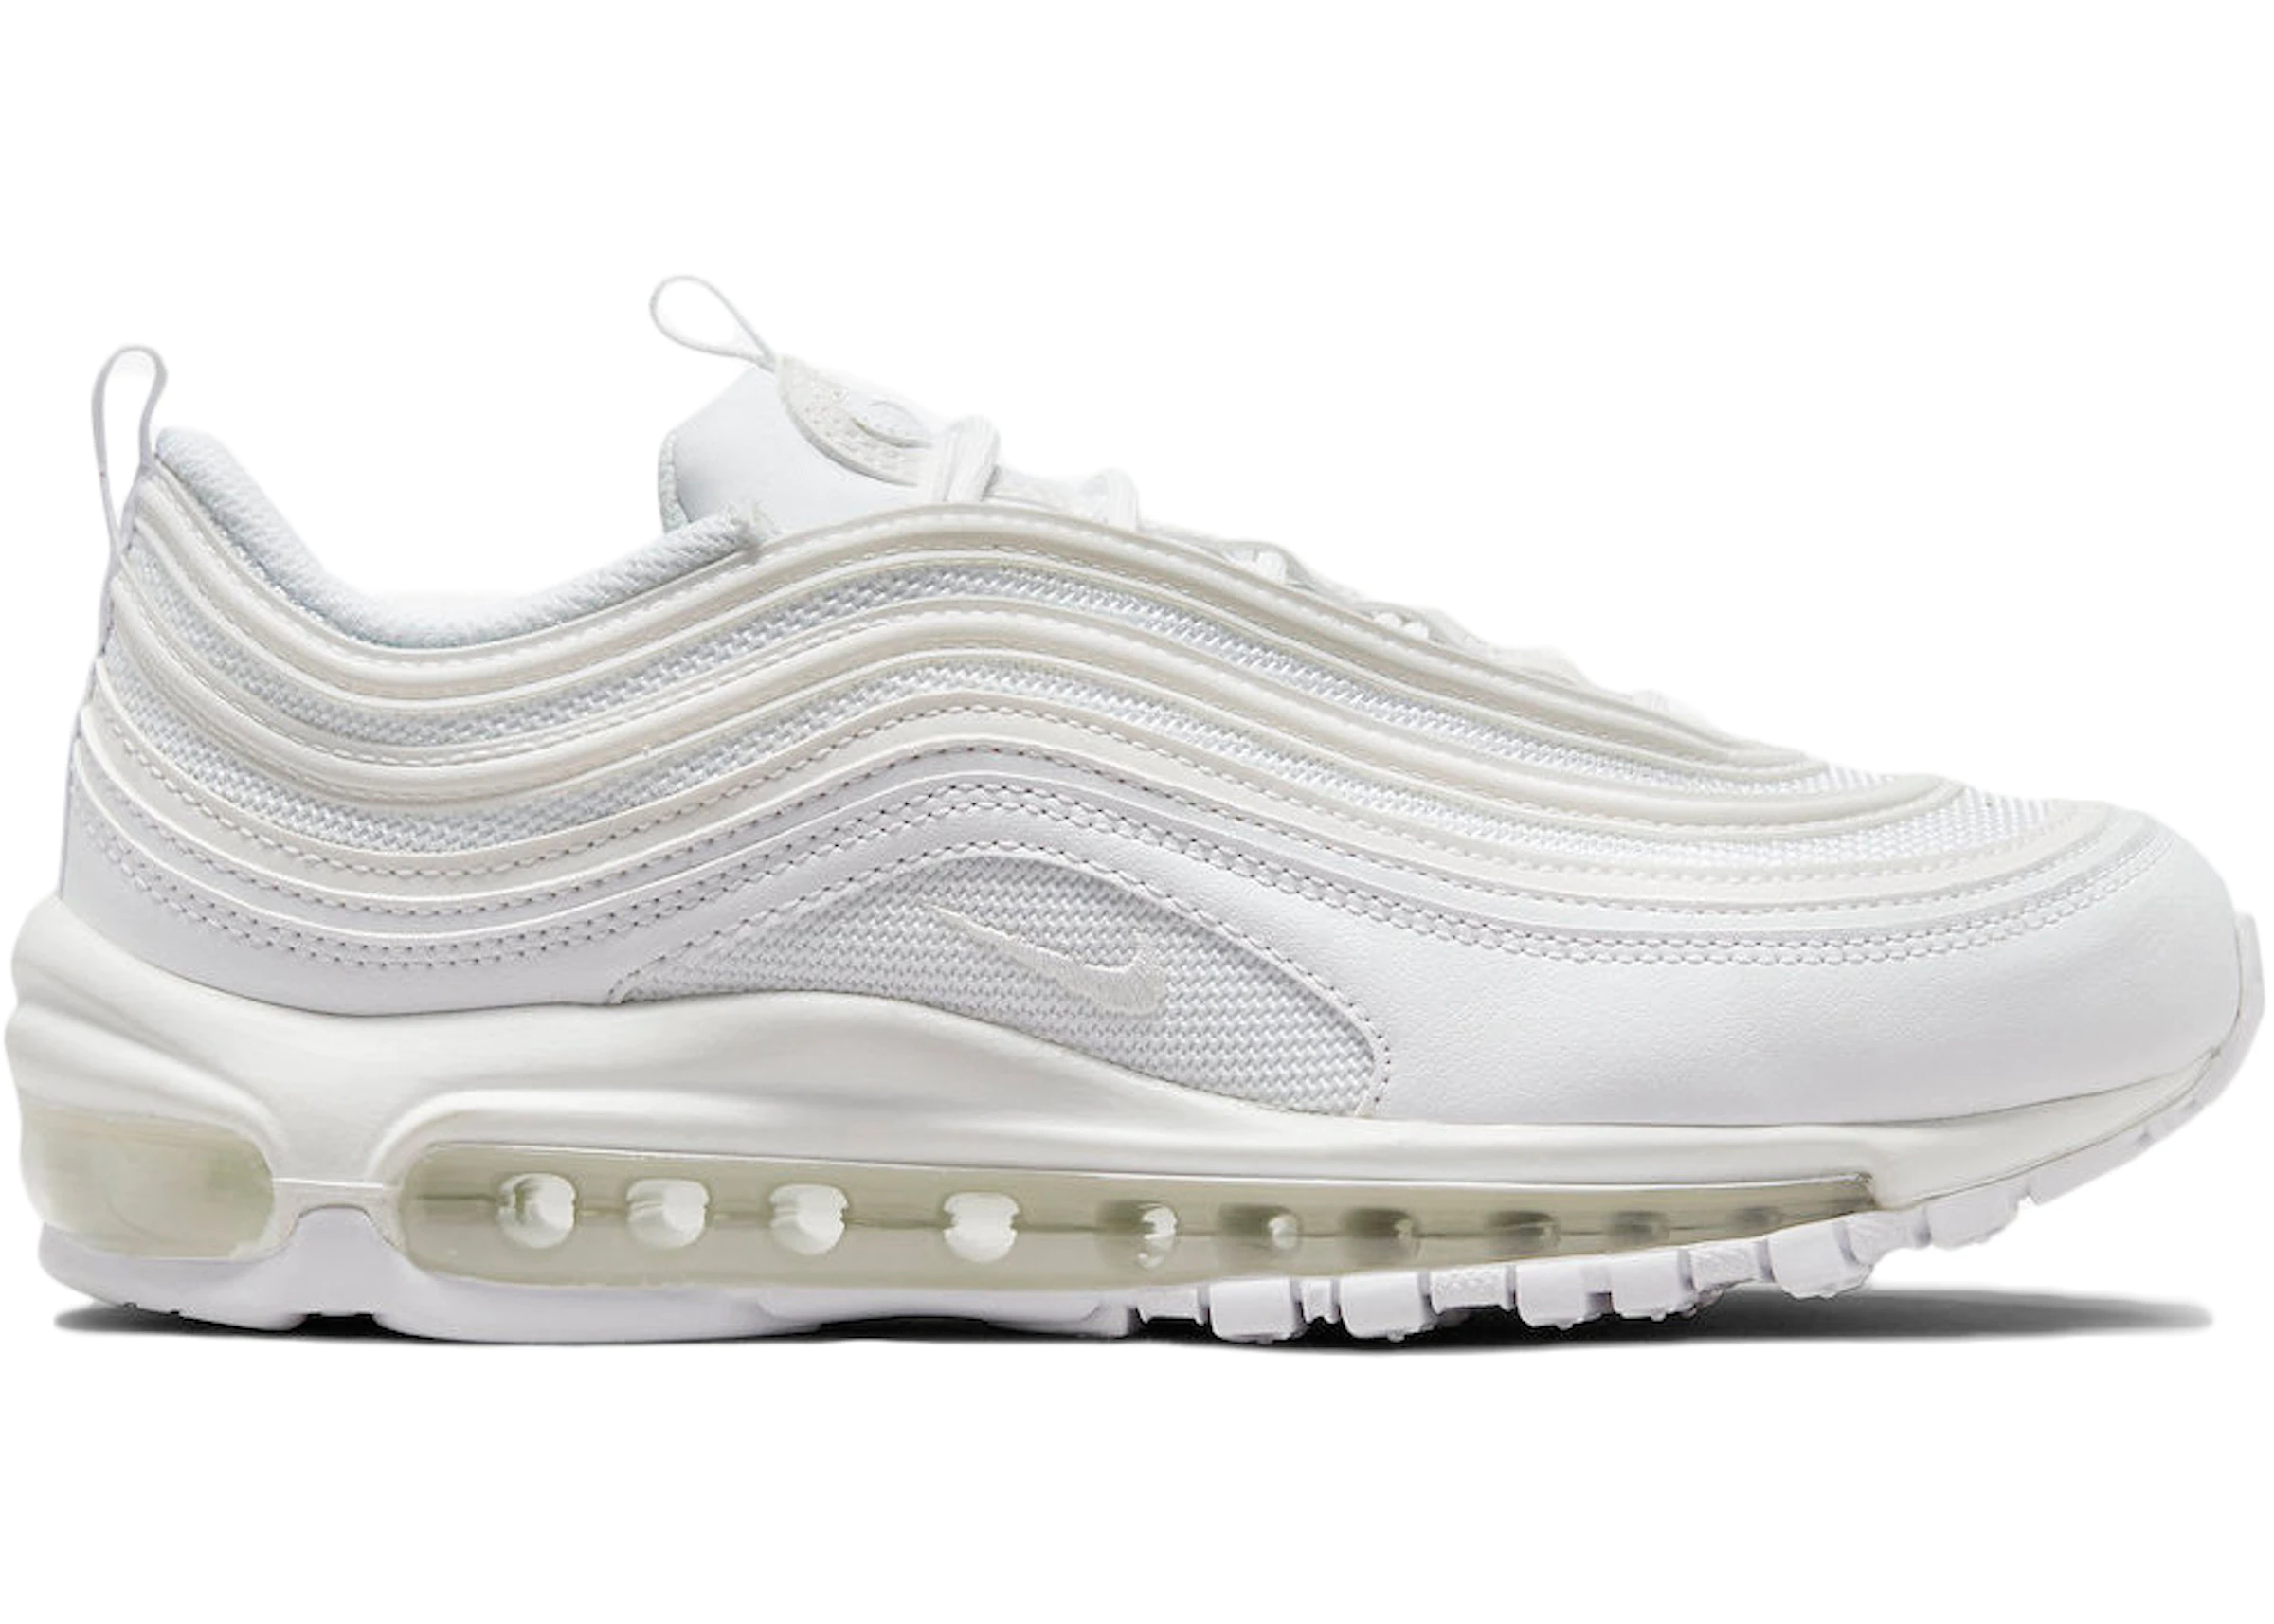 Tact Peregrination Humanistisch Nike Air Max 97 Sneakers - StockX